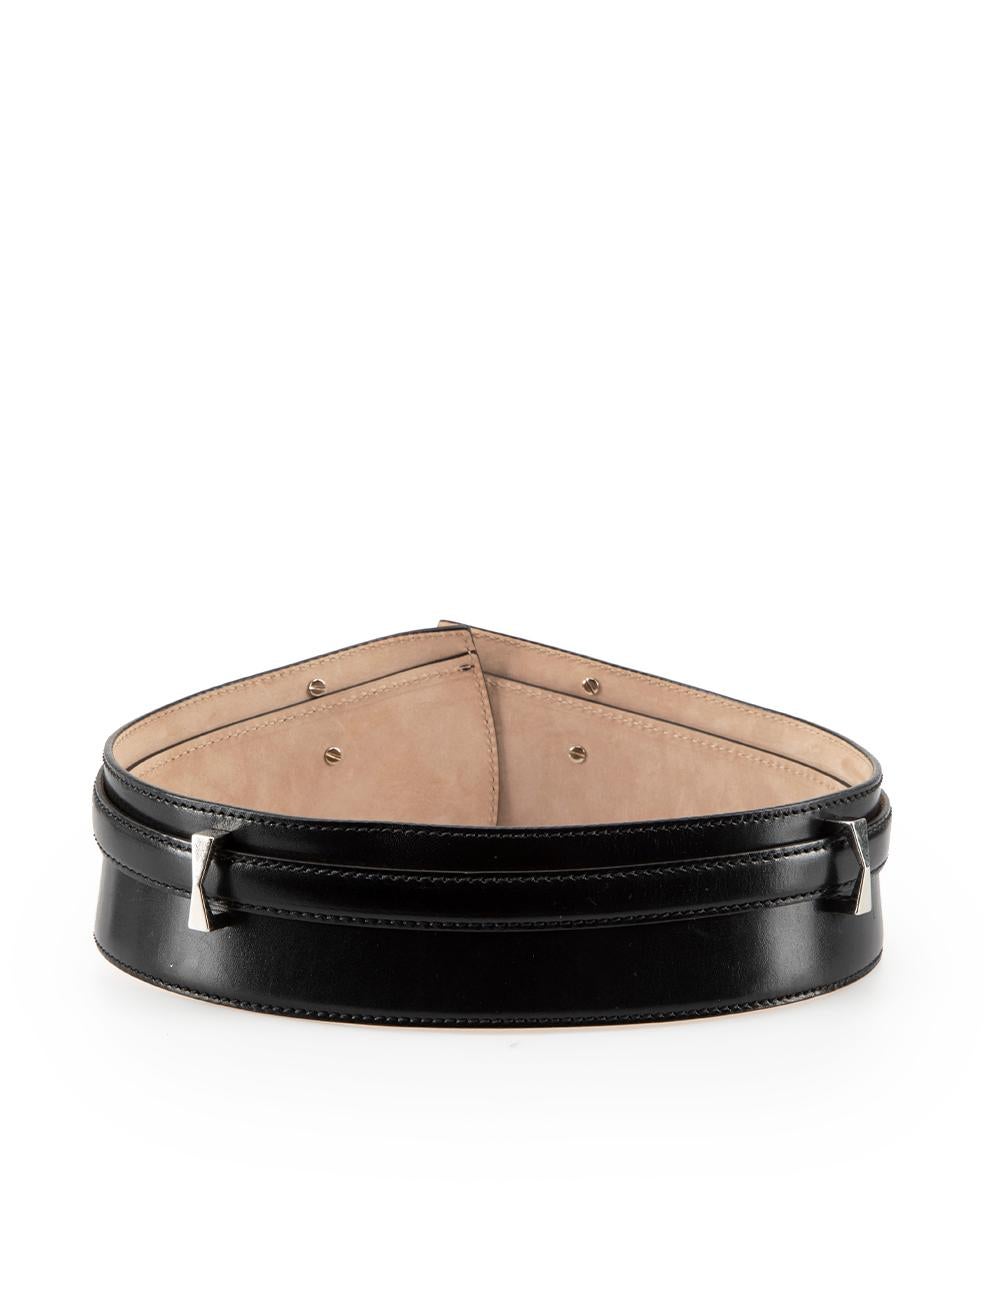 CONDITION is Very good. Minimal wear to belt is evident. Minimal wear to the wide belt upper with scratches and a light mark to the right-side on this used Alexander McQueen designer resale item.



Details


Black

Leather

Wide belt

Silver tone